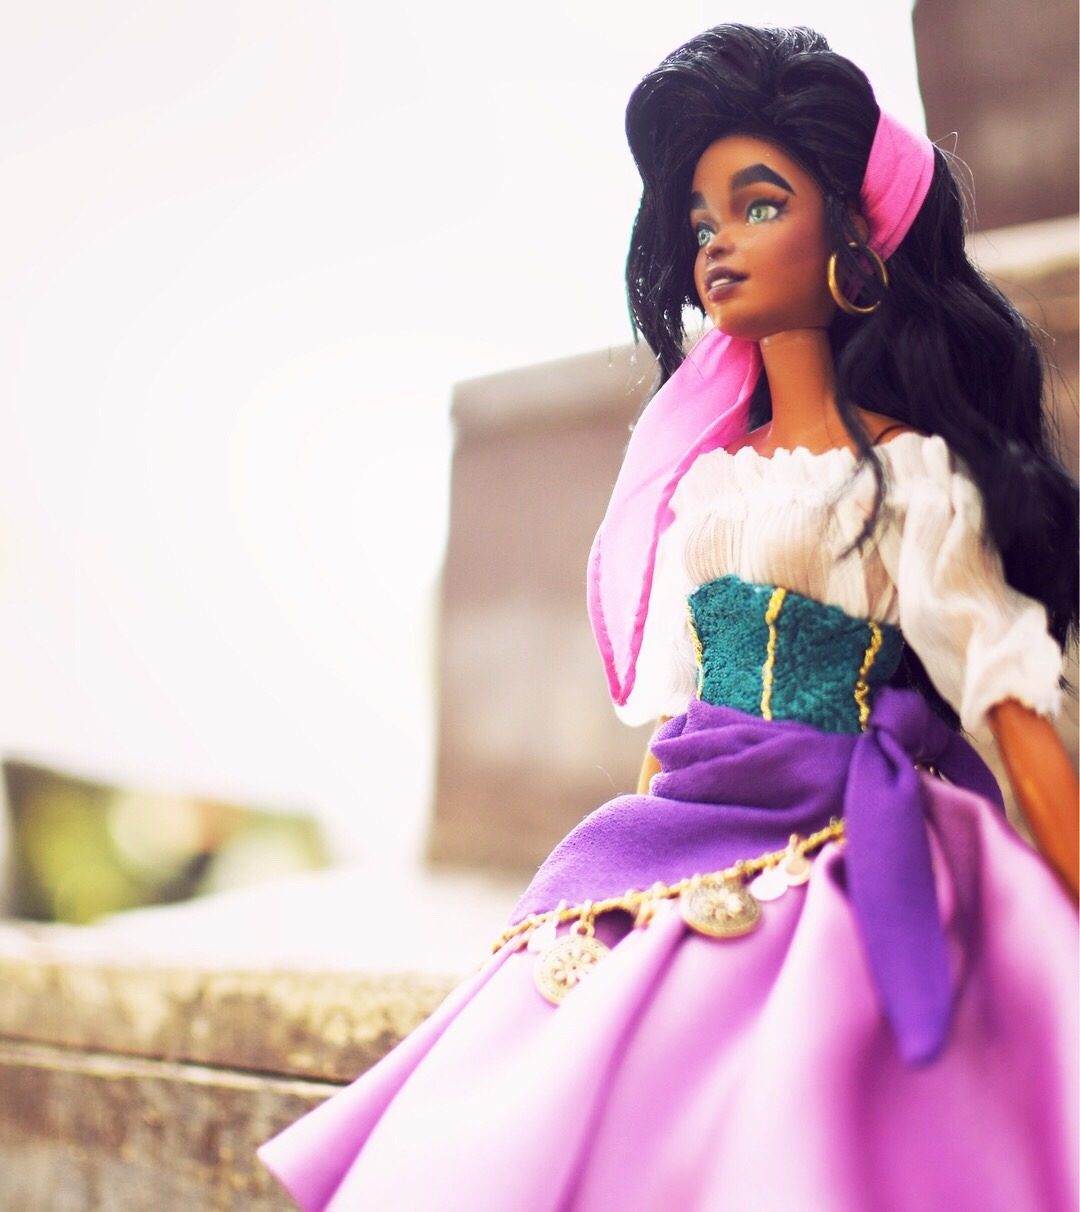 Finally was able to take decent pictures of the @barbie made to move custom Esmeralda